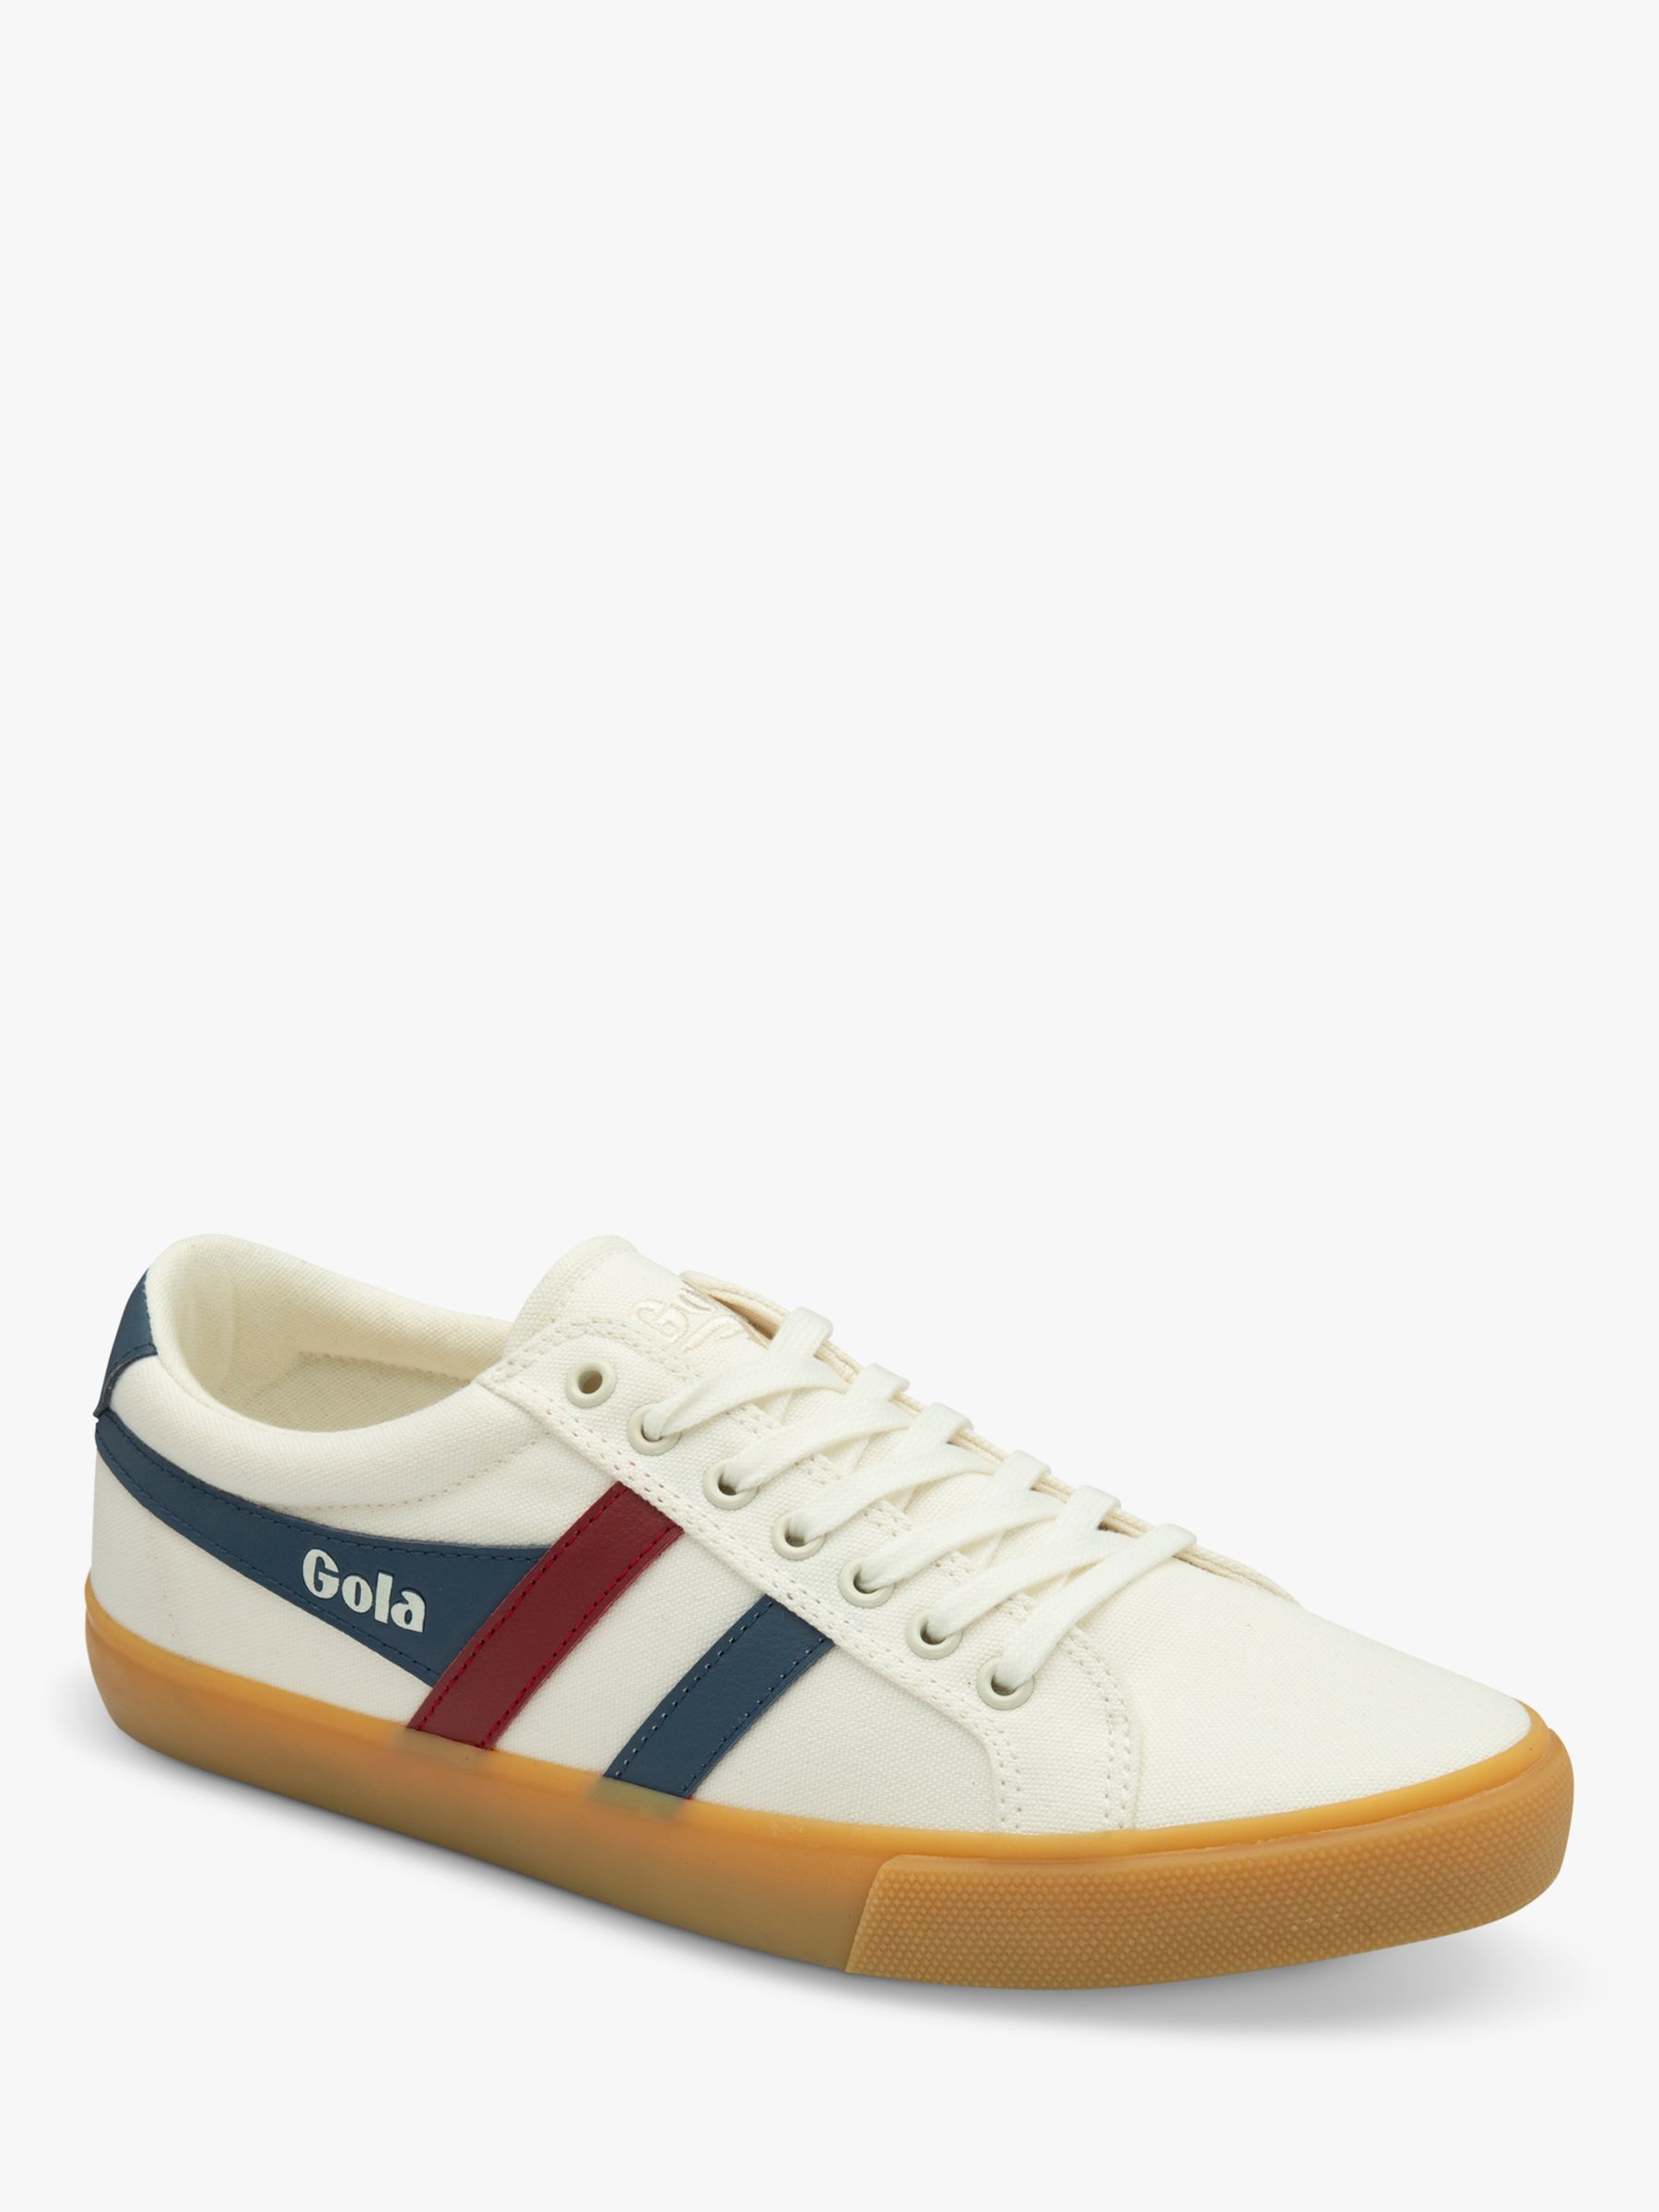 Buy Gola Classics Varsity Lace Up Trainers, White/Moonlight/Red/Gum Online at johnlewis.com